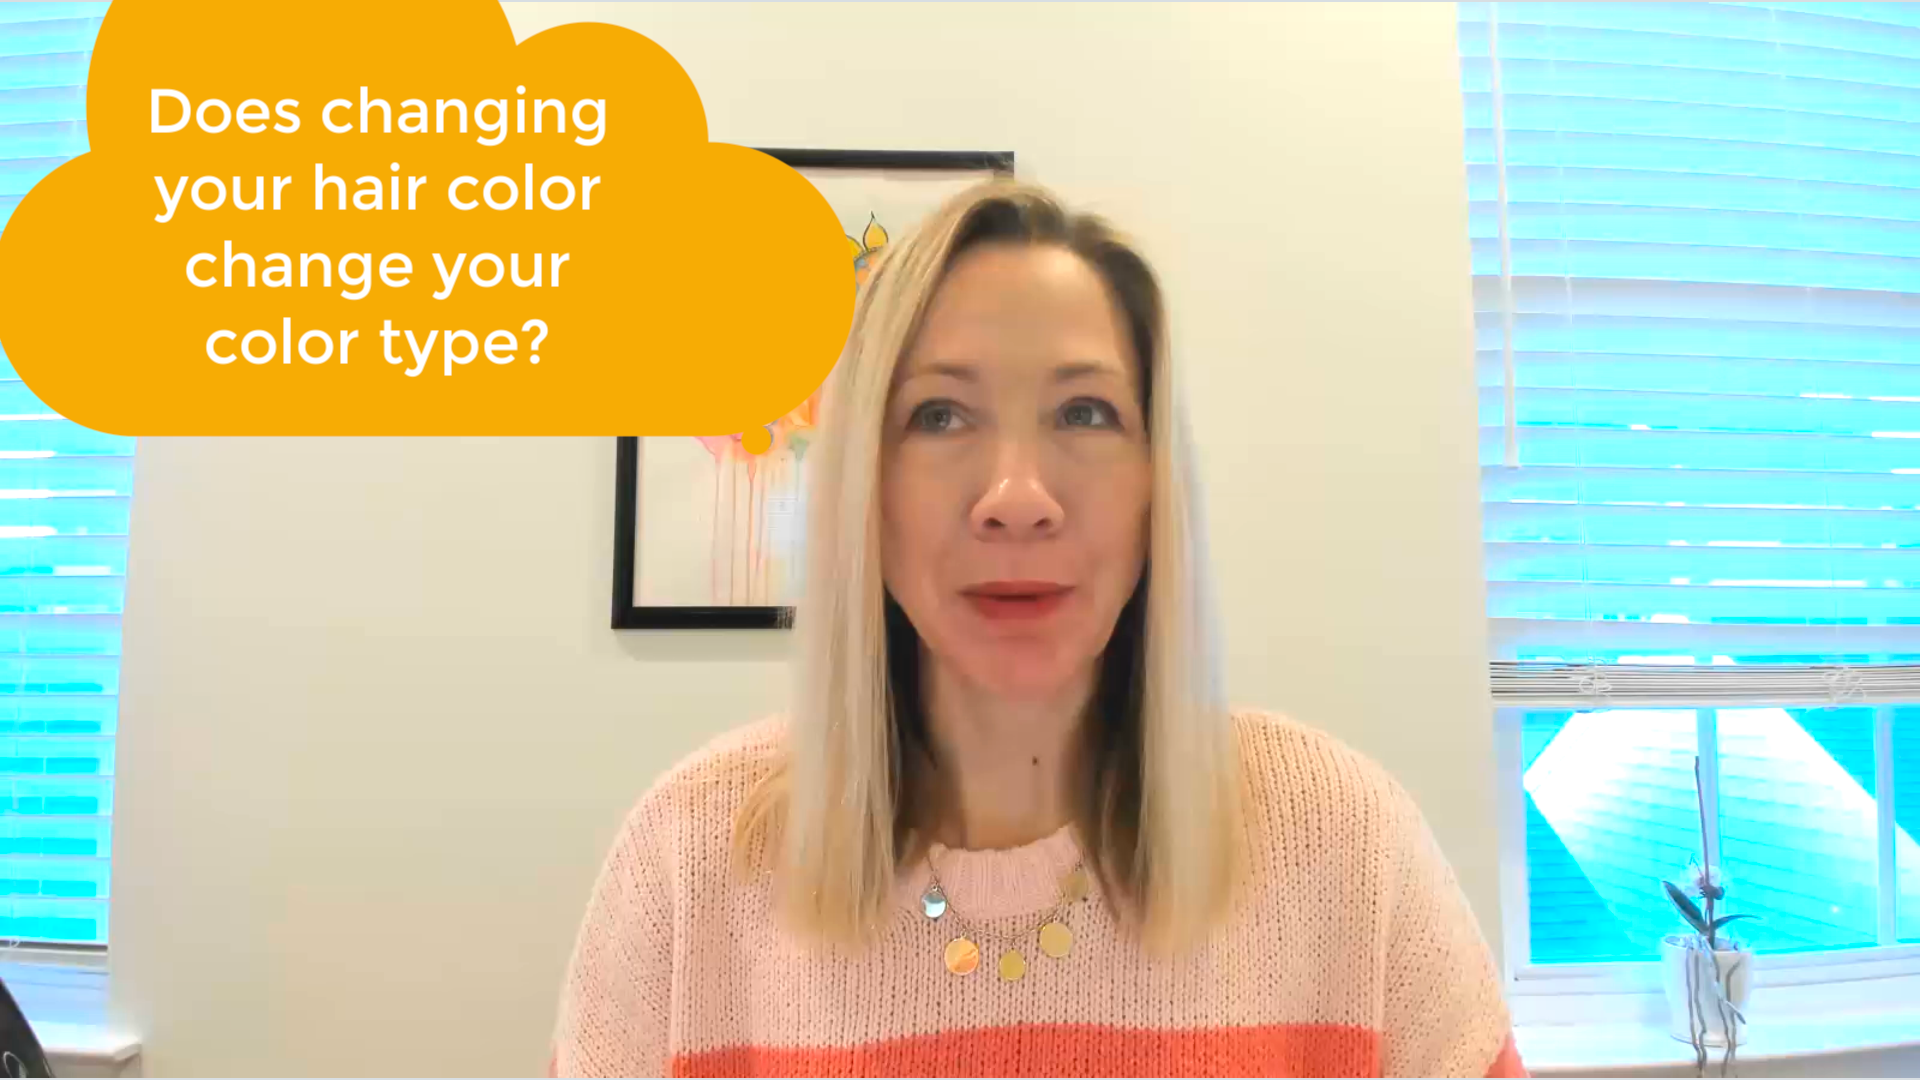 Does Changing Your Hair Color Change Your Color Type?